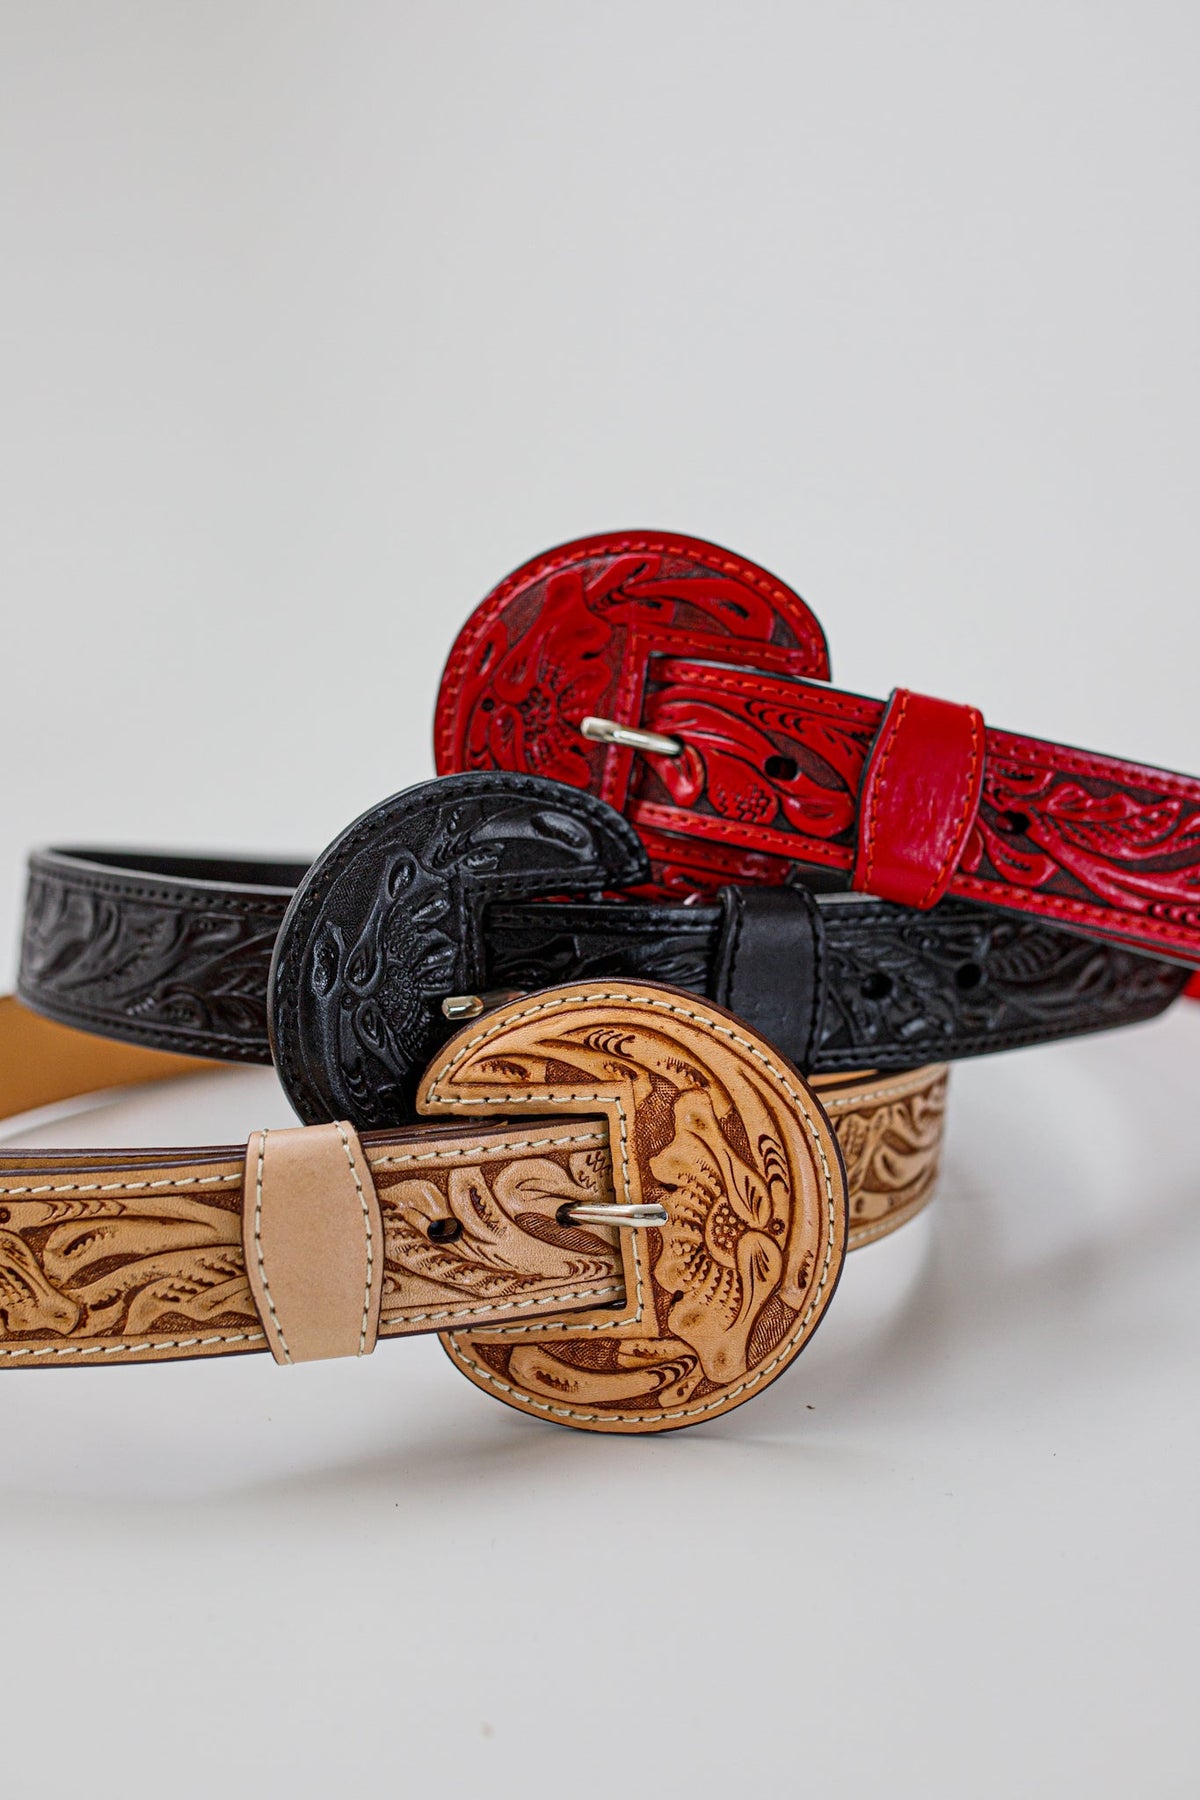 Tooled Vintage Leather Belts in Tan